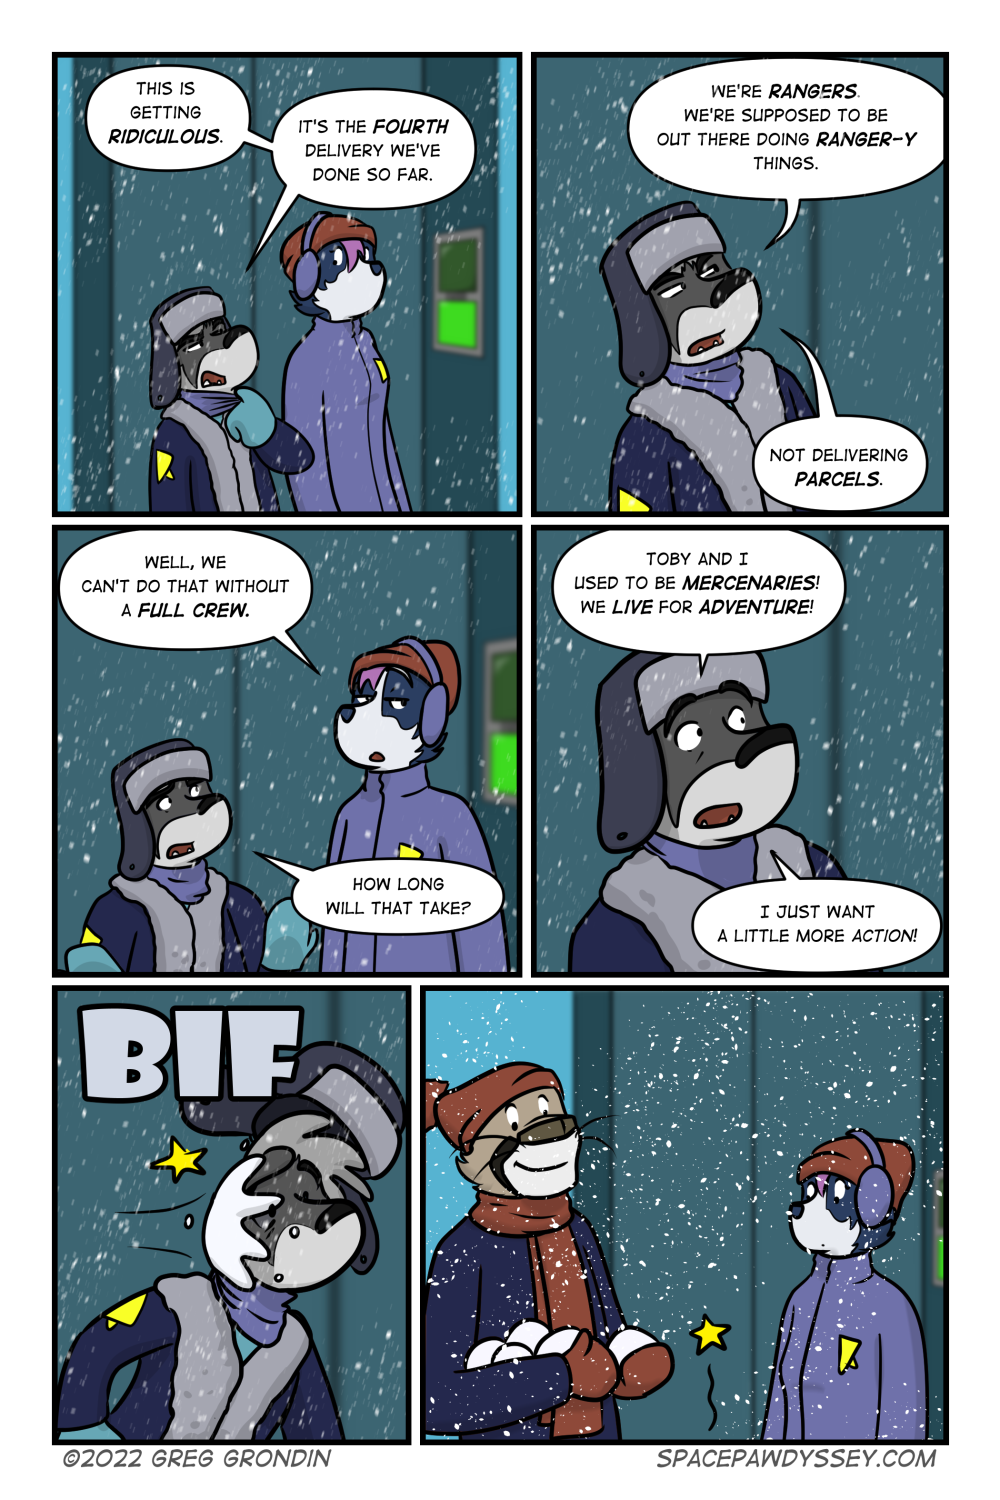 Space Pawdyssey #573